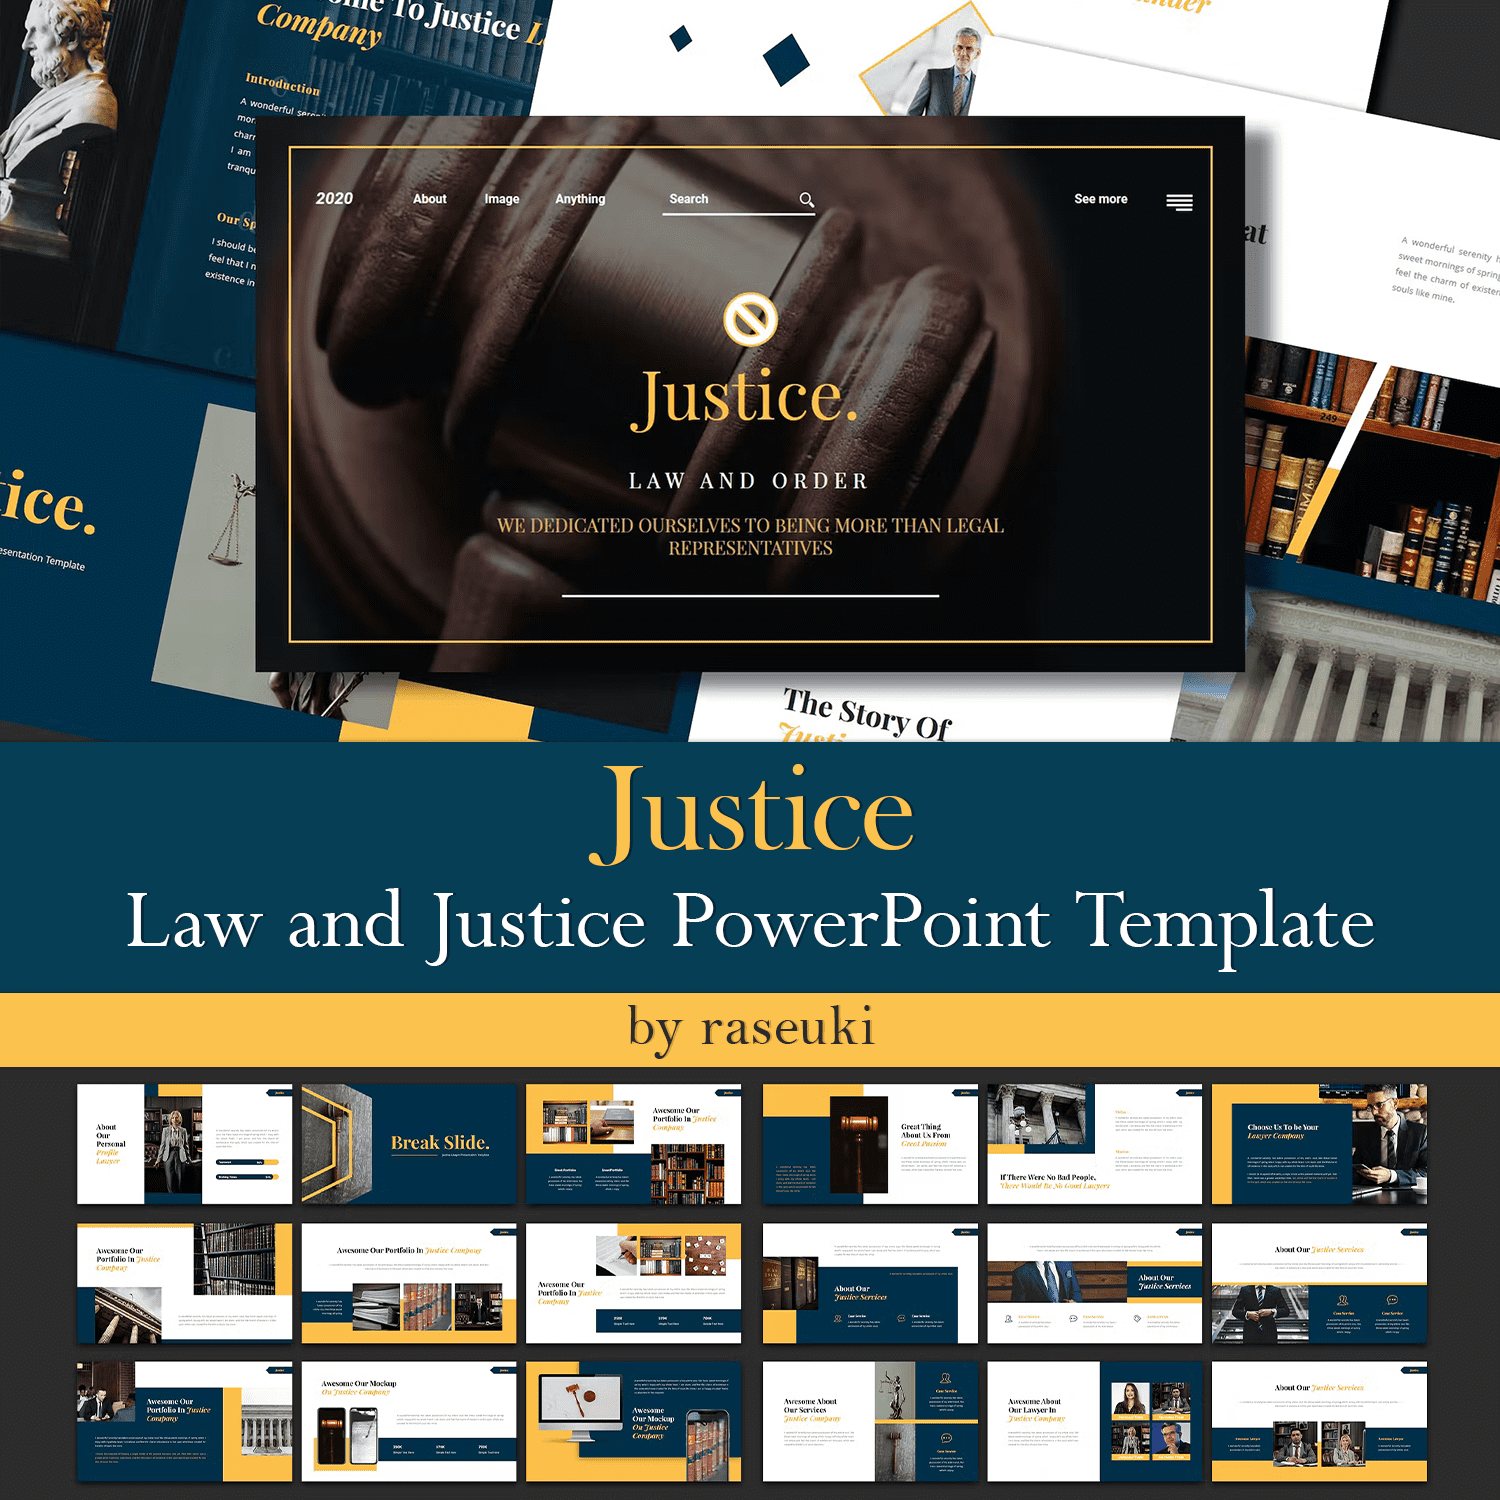 Prints of justice law and justice powerpoint template.